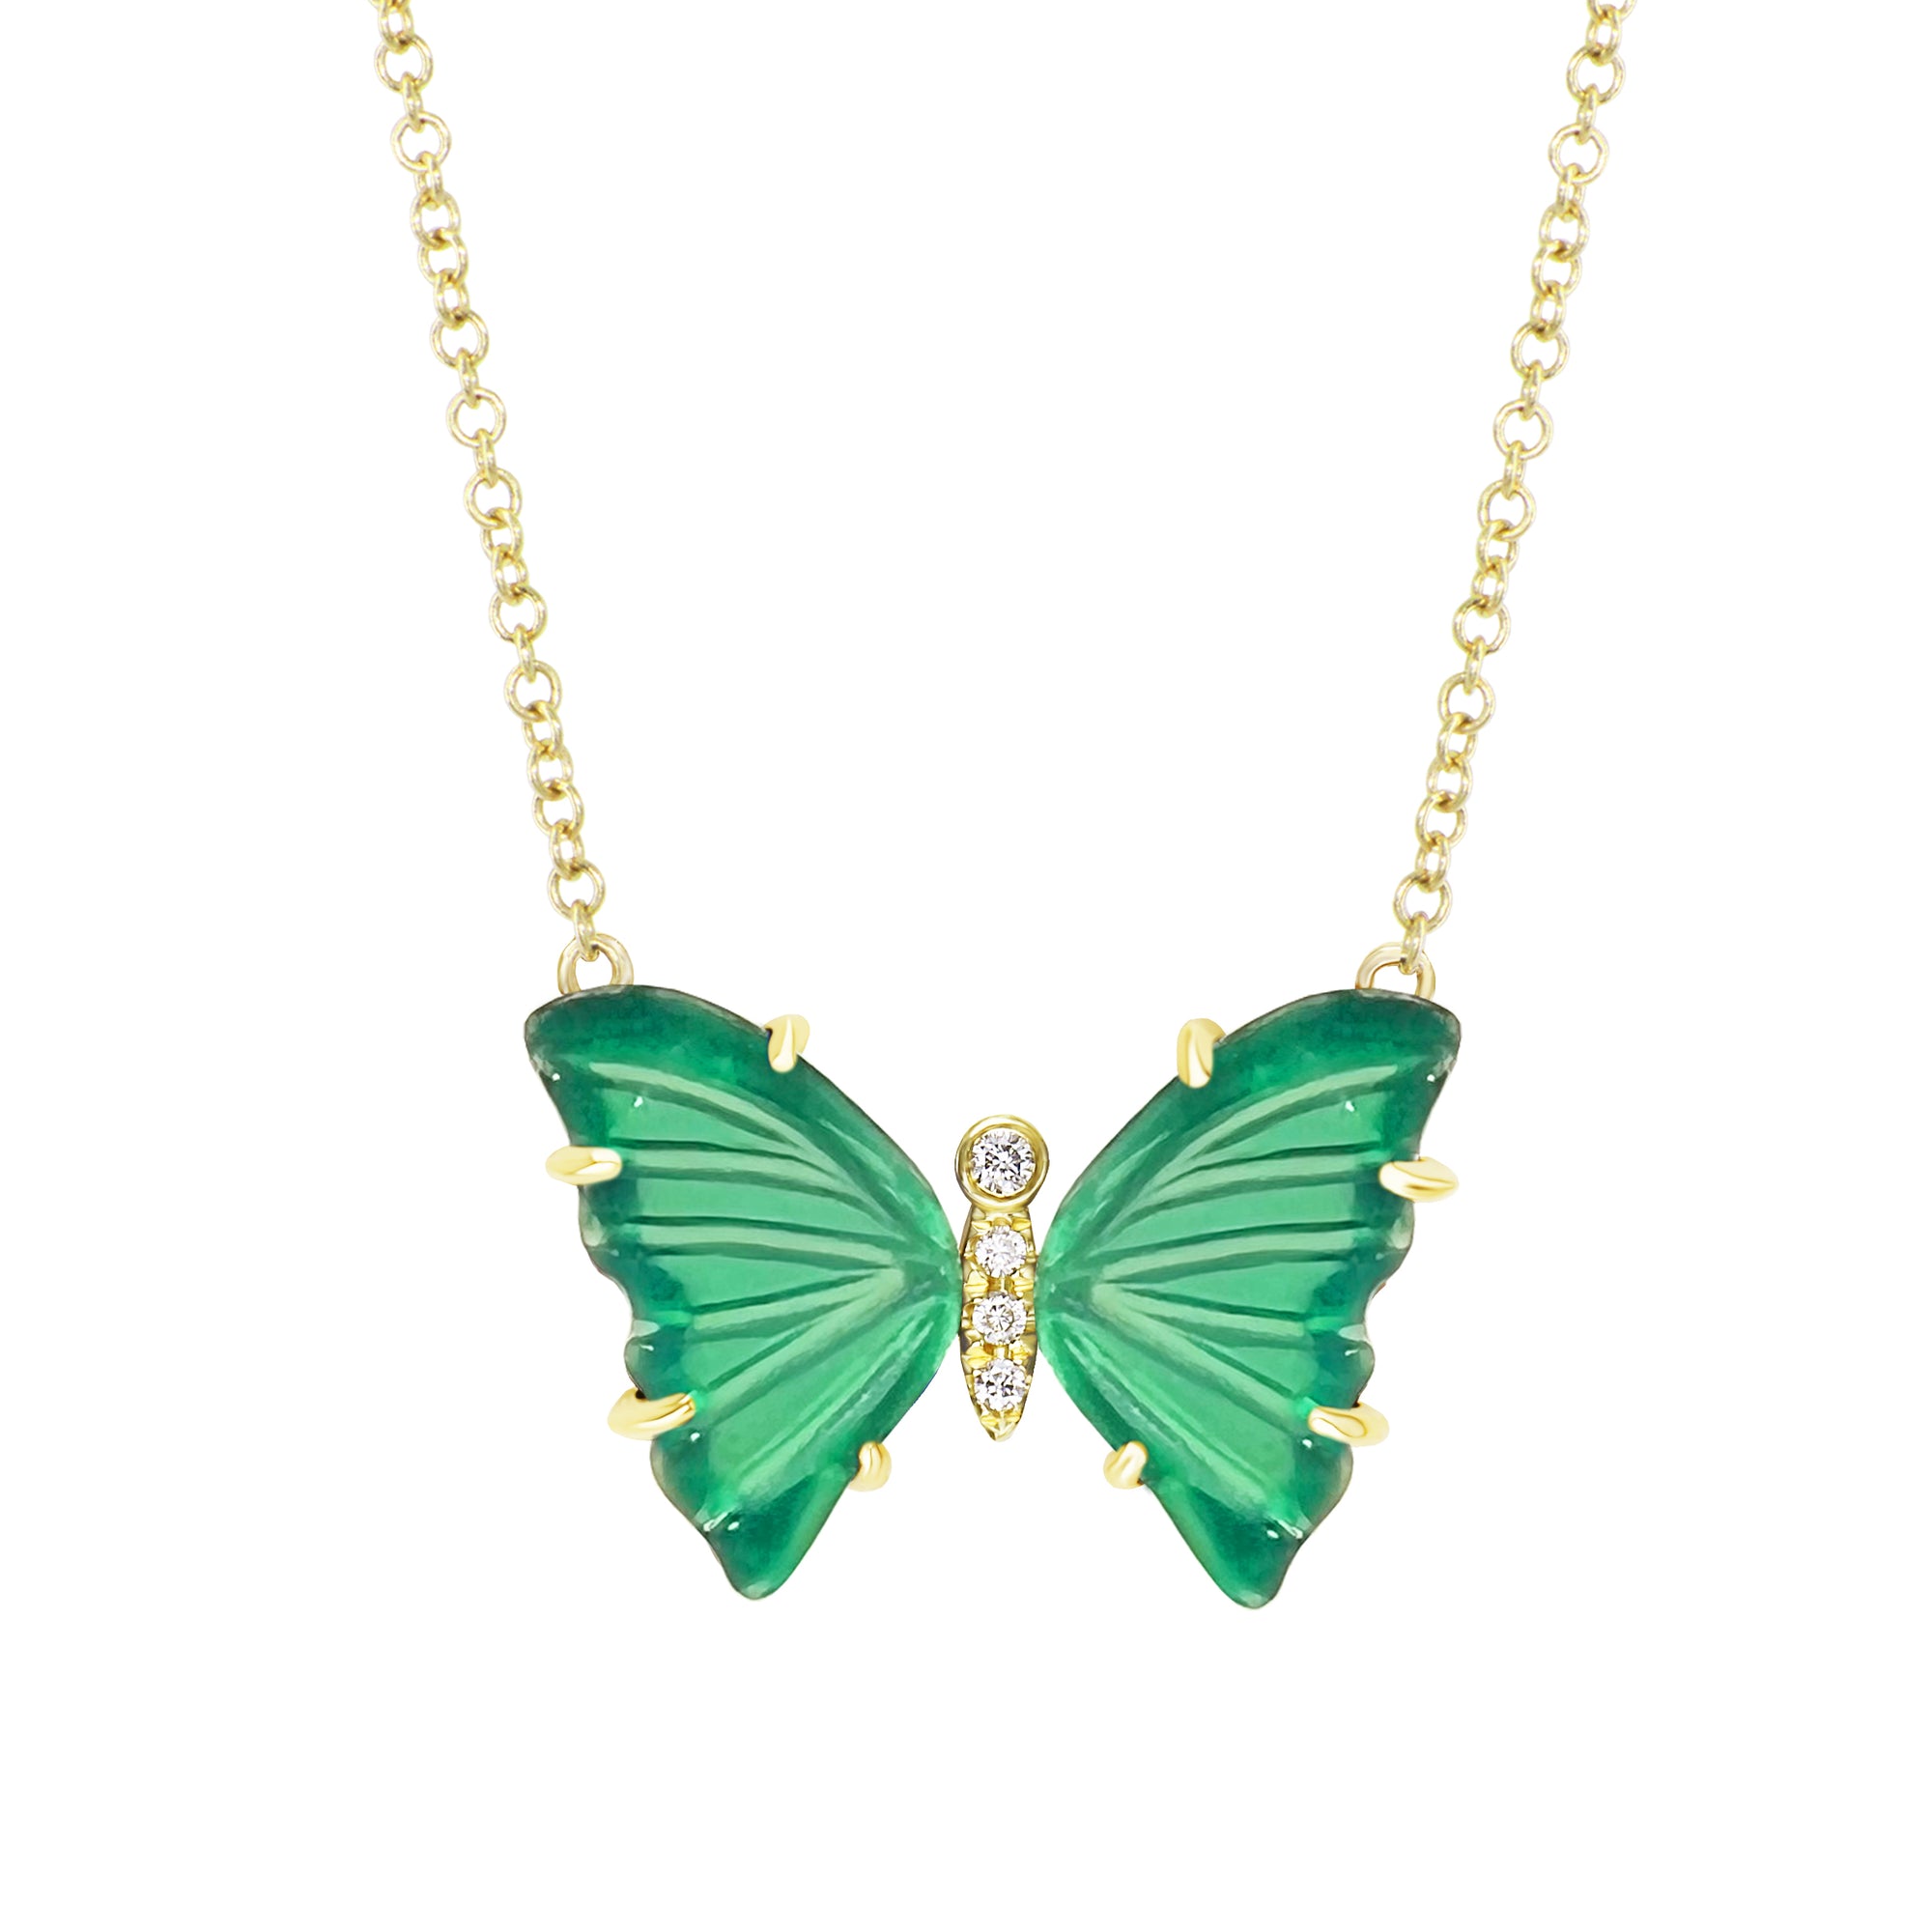 Green Chrysoprase Butterfly Necklace with Diamonds and Prongs